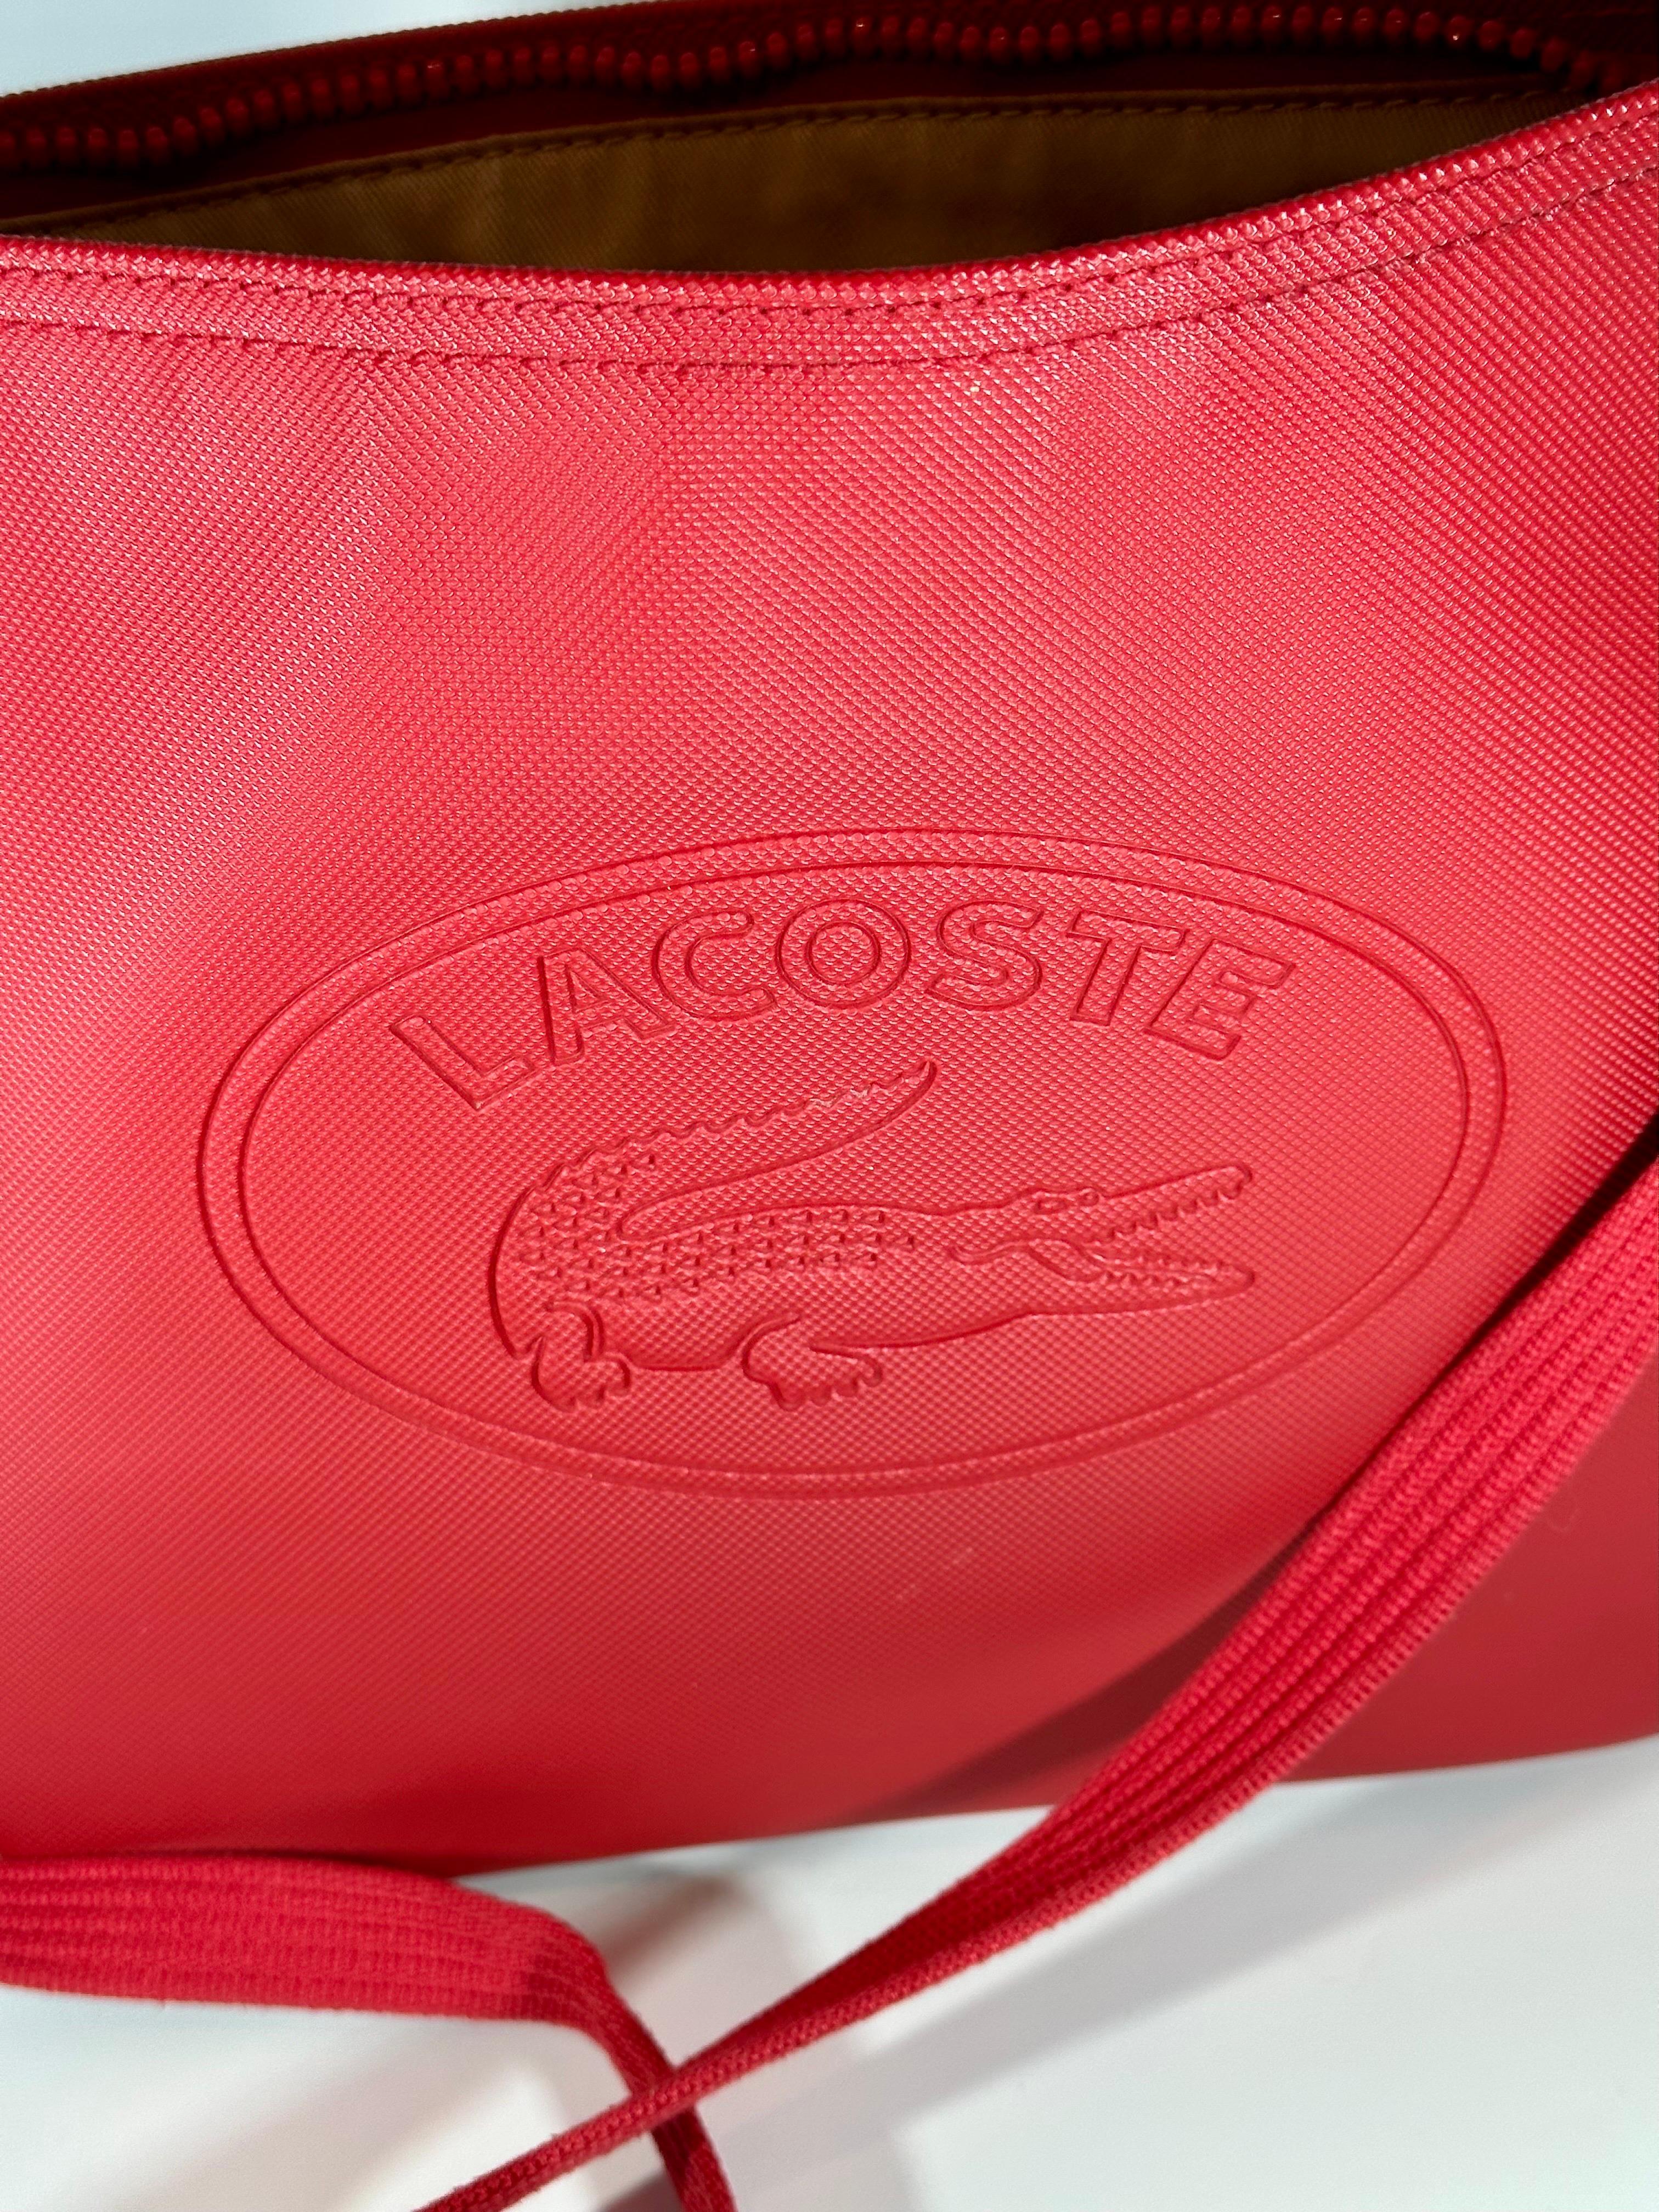 
Authentic Lacoste bag, Very well taken care of!
Canvas Red, very spacious!
Zipped on the top 
Inside a divider to make two compartment 
inside is super clean 
bag is in  very good condition

No dust bag.




We are Estate Jeweler and my main